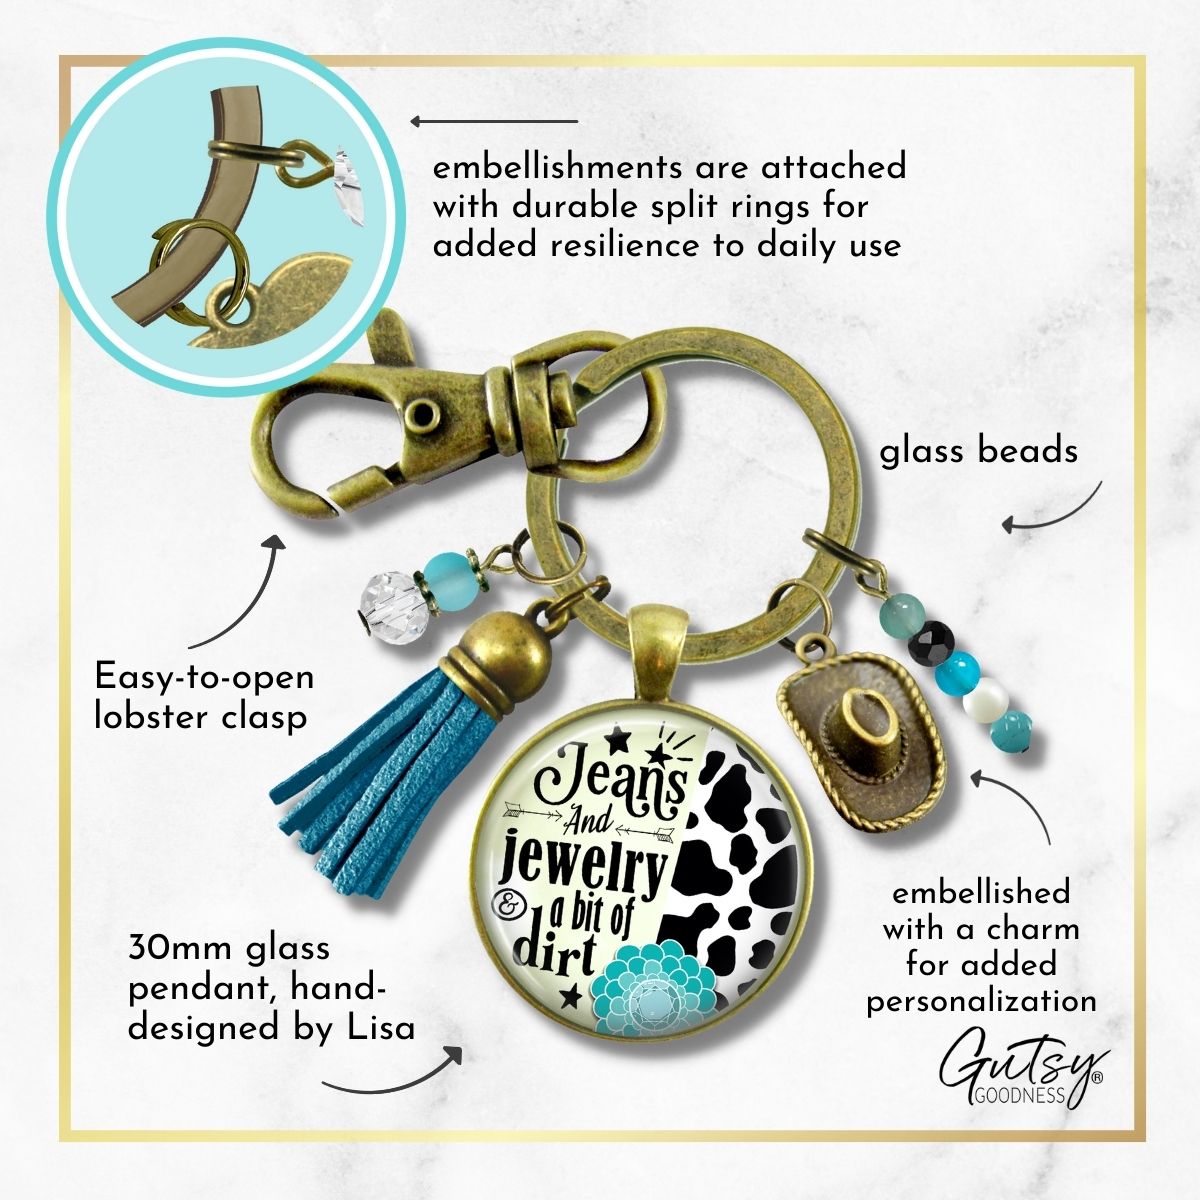 Handmade Gutsy Goodness Jewelry Jeans And Jewelry And A Bit Of Dirt Keychain Western Cowboy Hat & Tassel, Country Girl Card